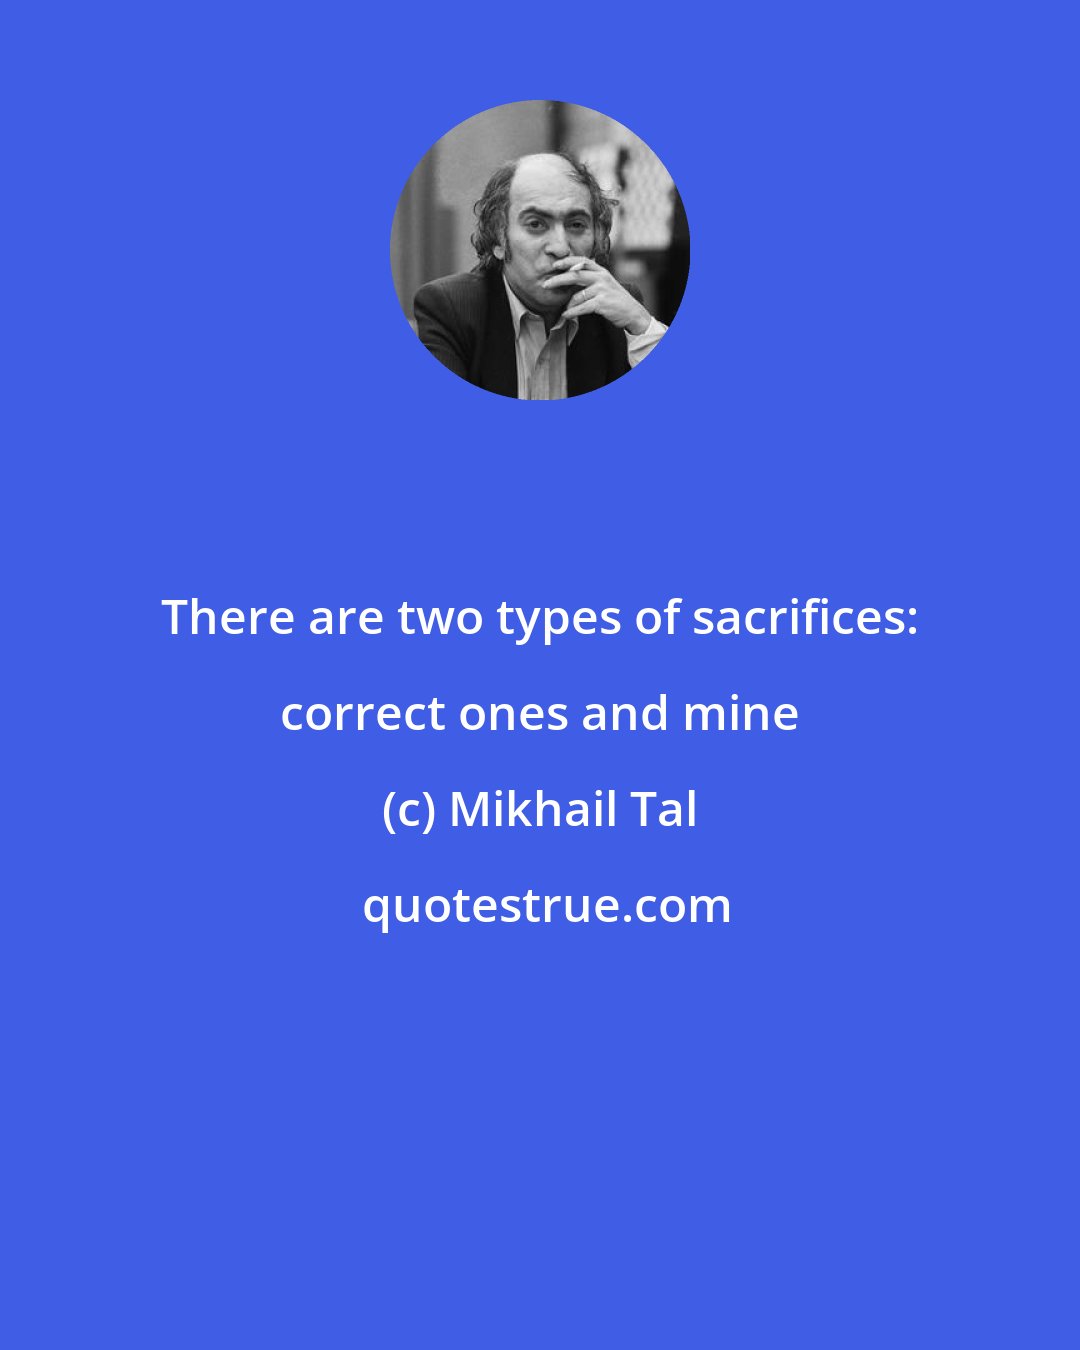 Mikhail Tal: There are two types of sacrifices: correct ones and mine